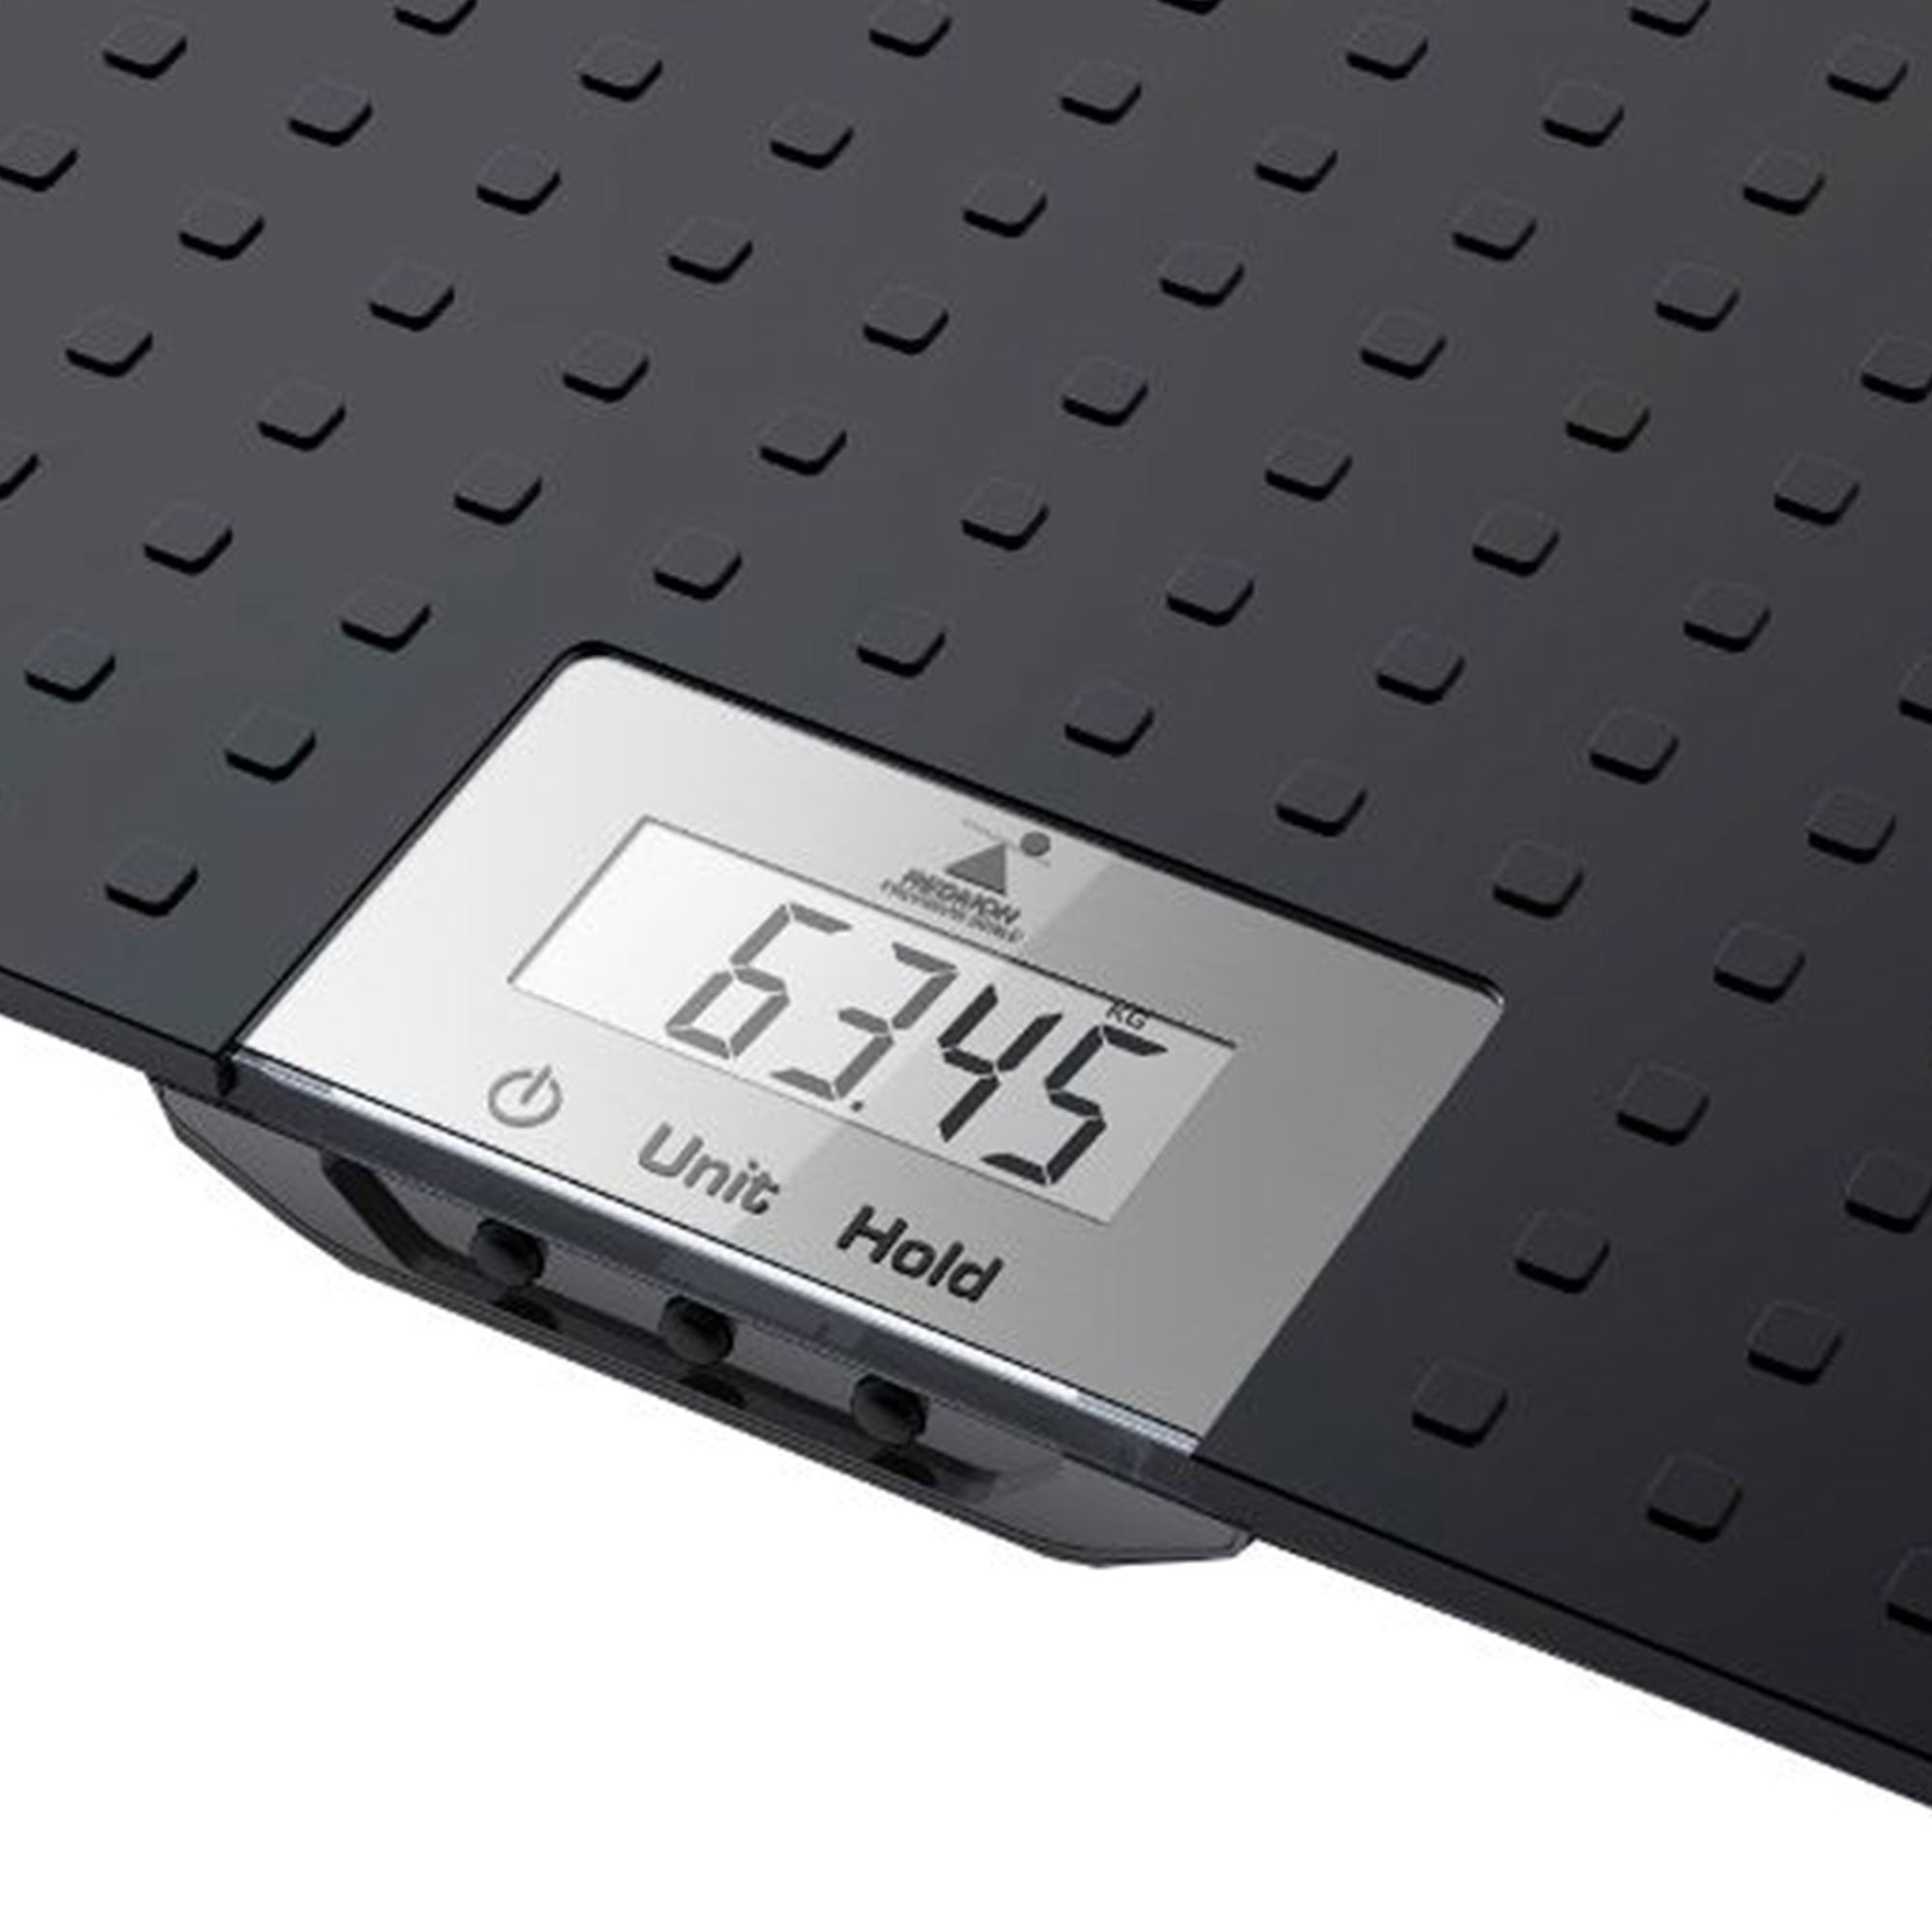 Precision Digital Small Dog or Cat Scale by Redmon